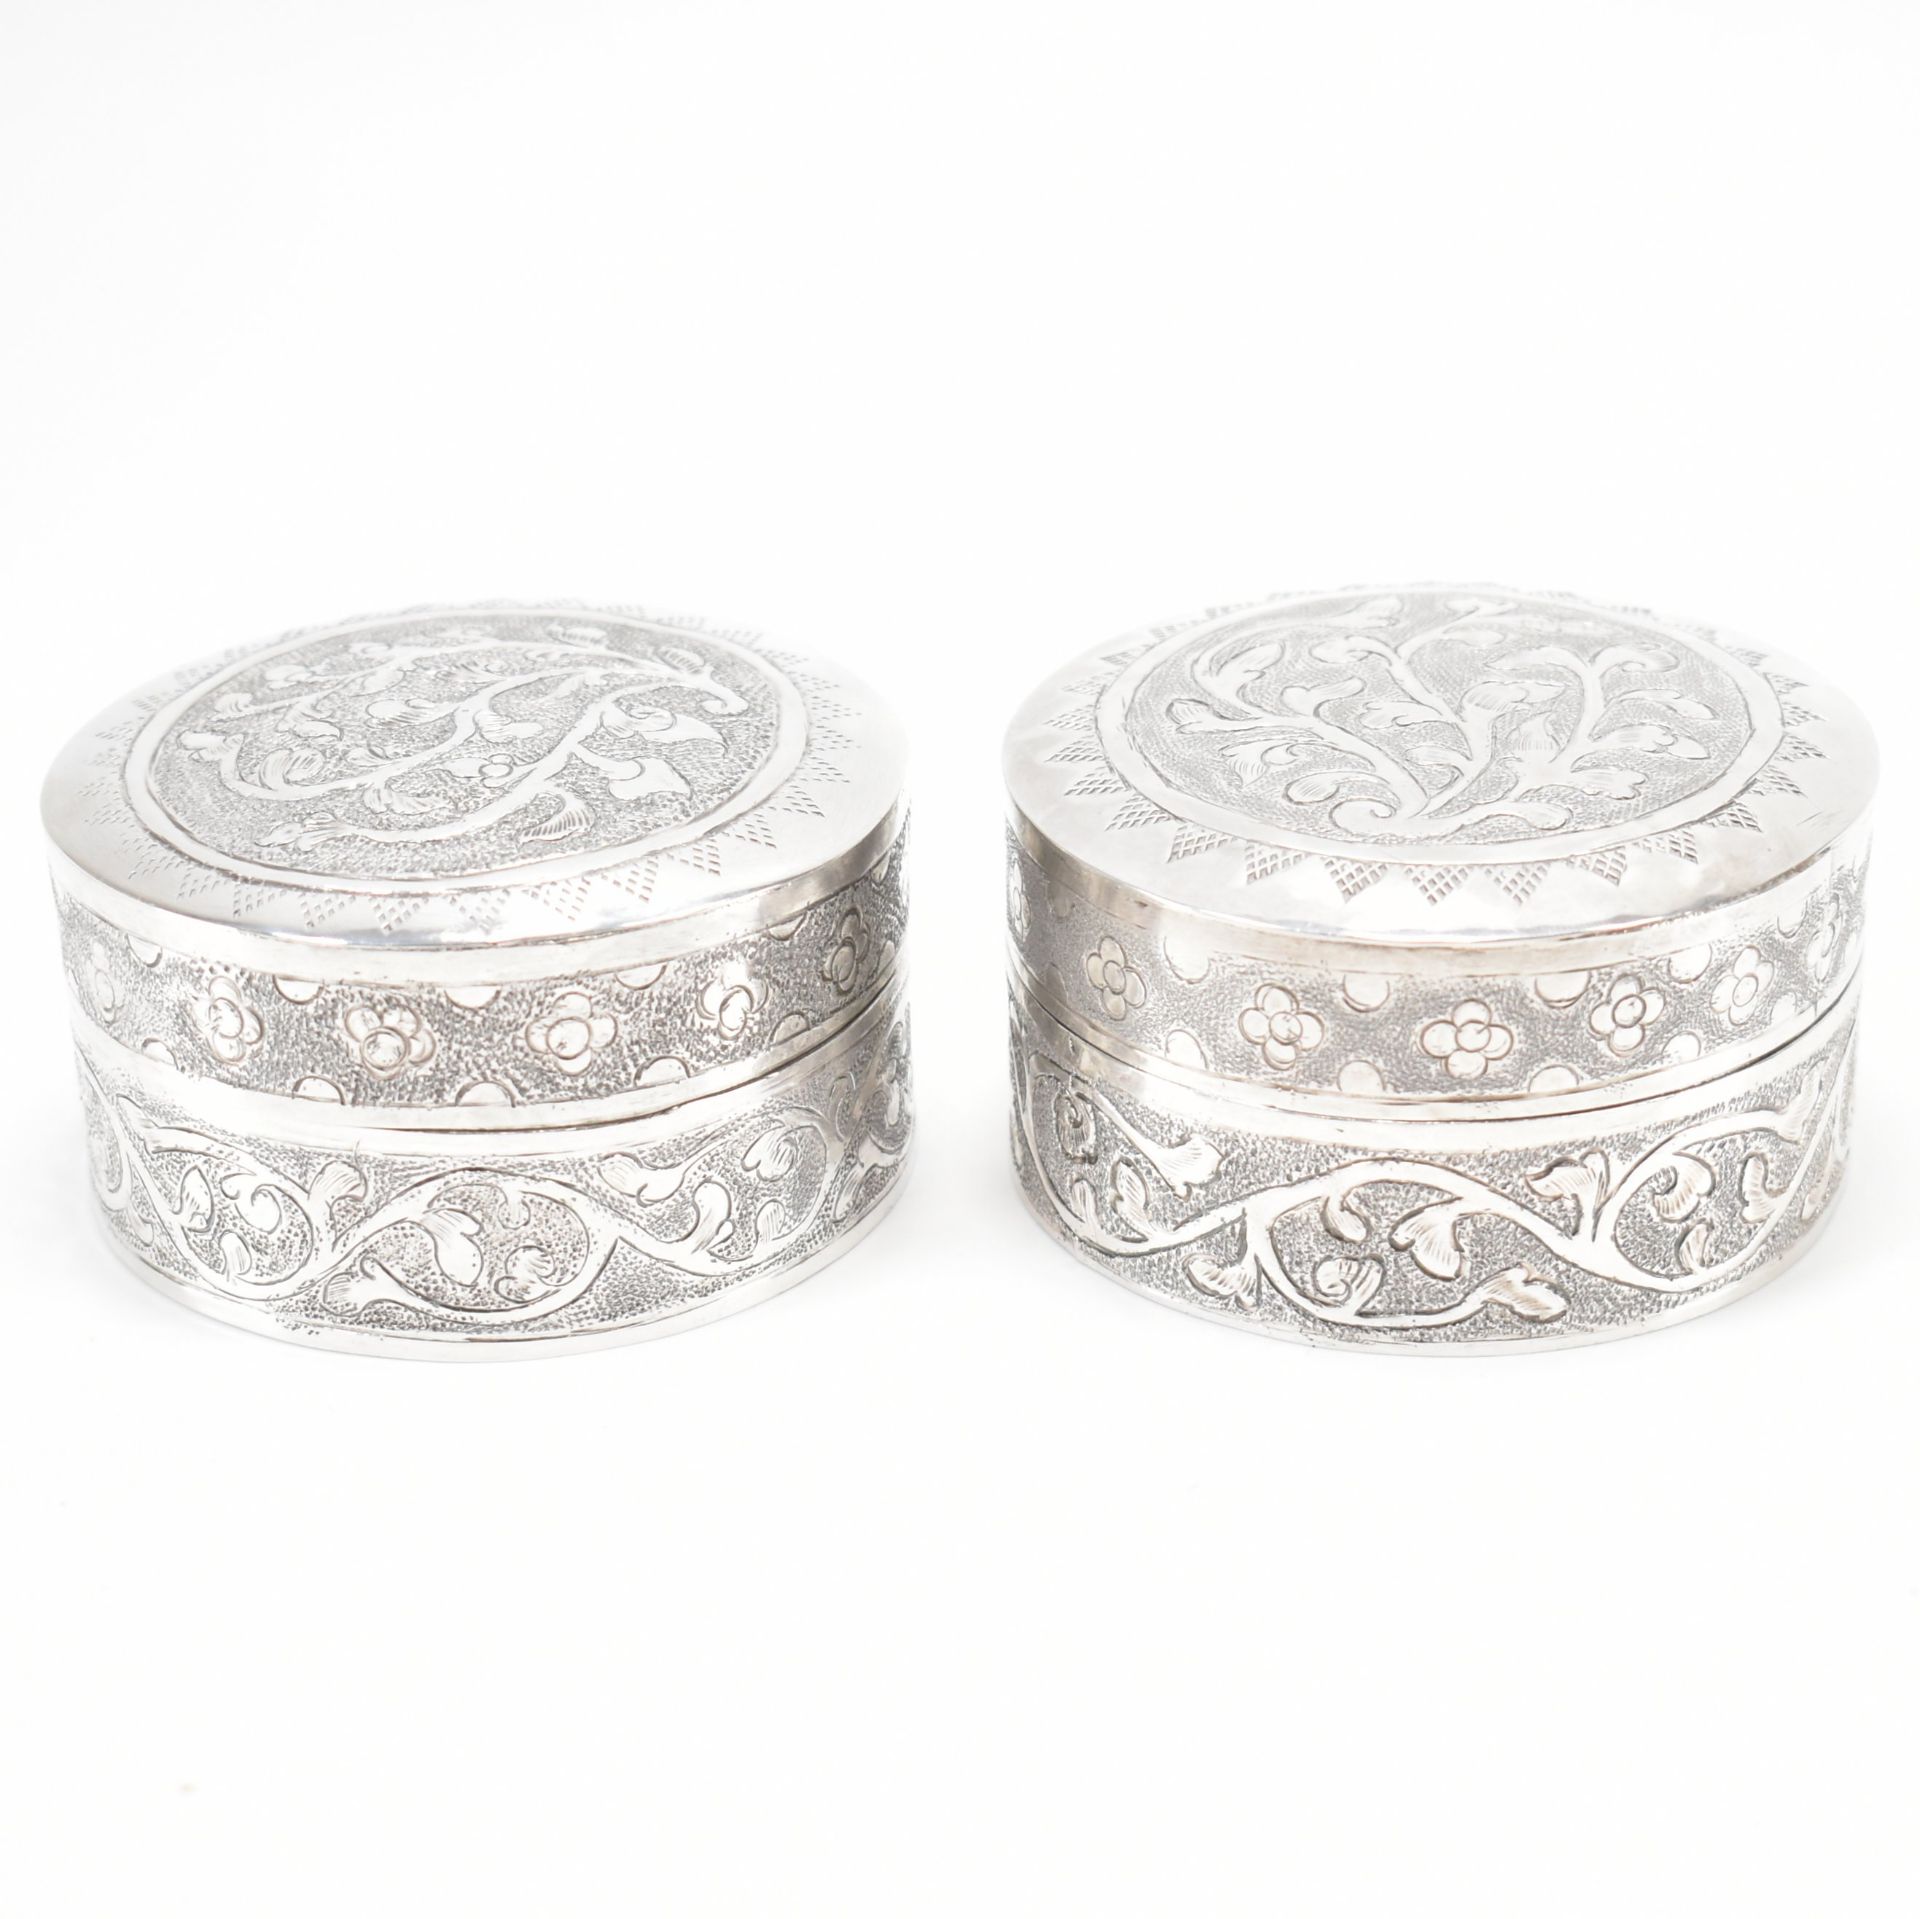 PAIR OF BRUNEI SILVER TRINKET BOXES - Image 2 of 3